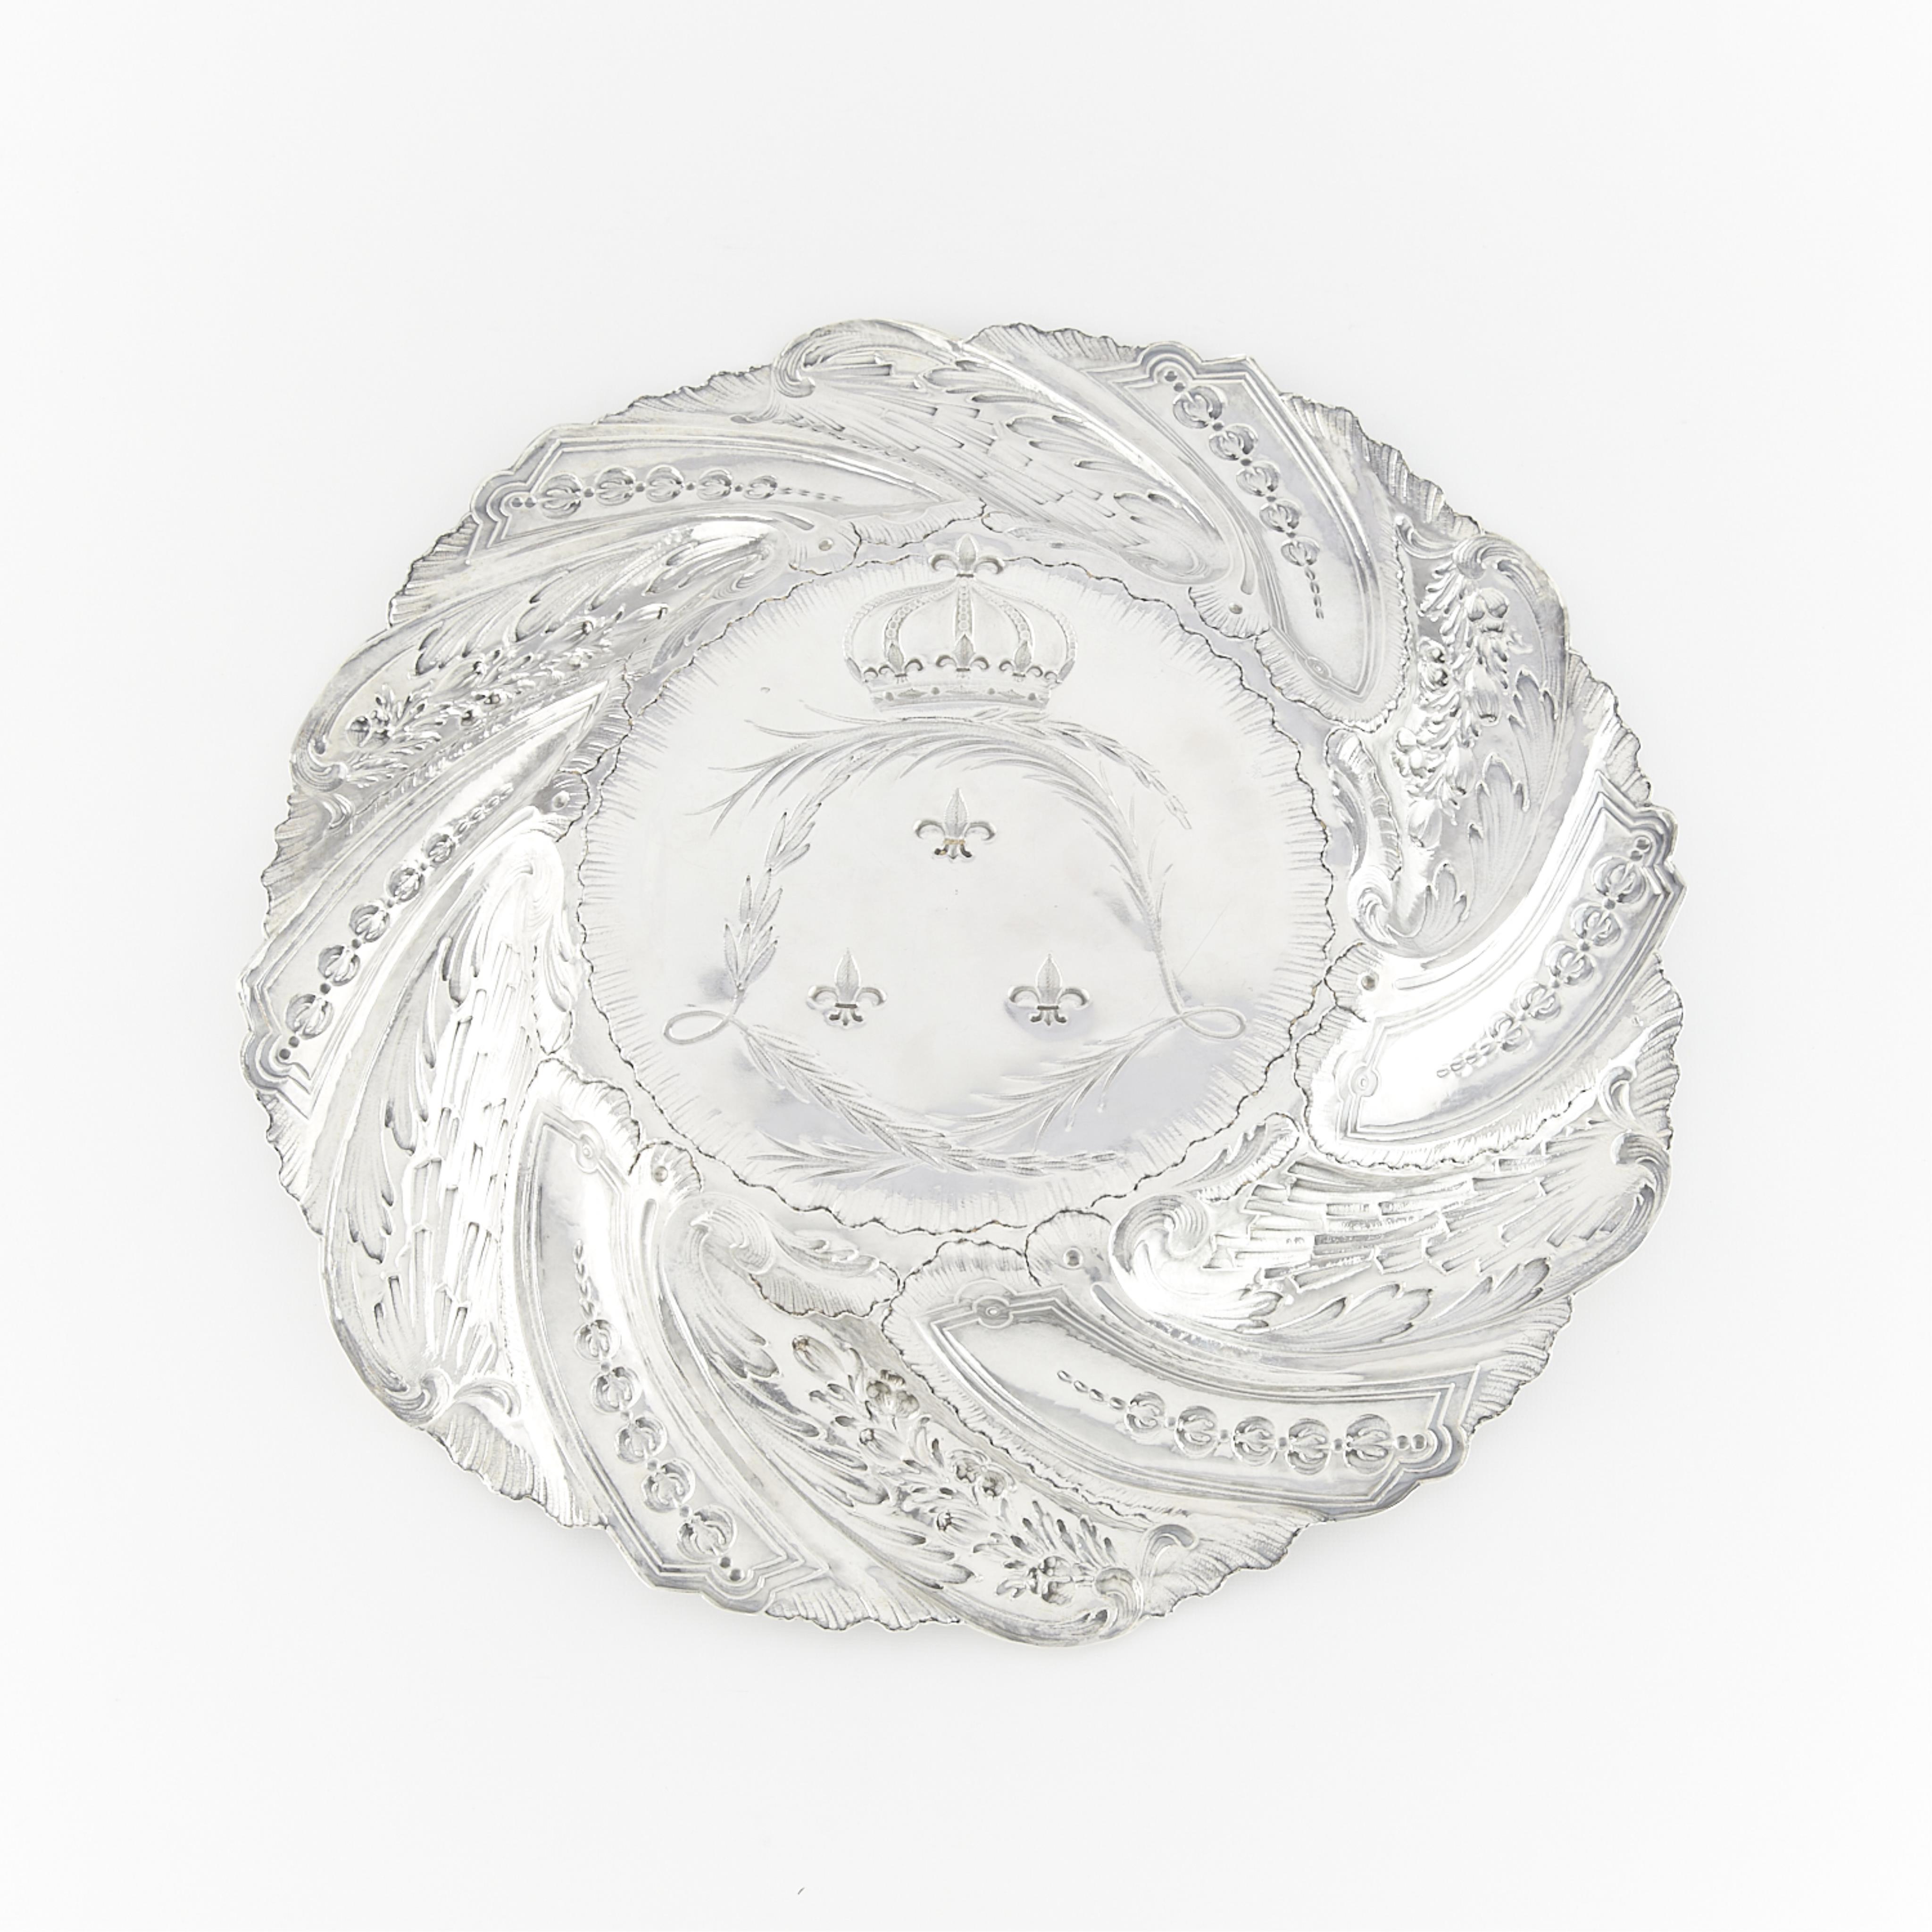 French Sterling Silver Platter 30.8 ozt - Image 3 of 5